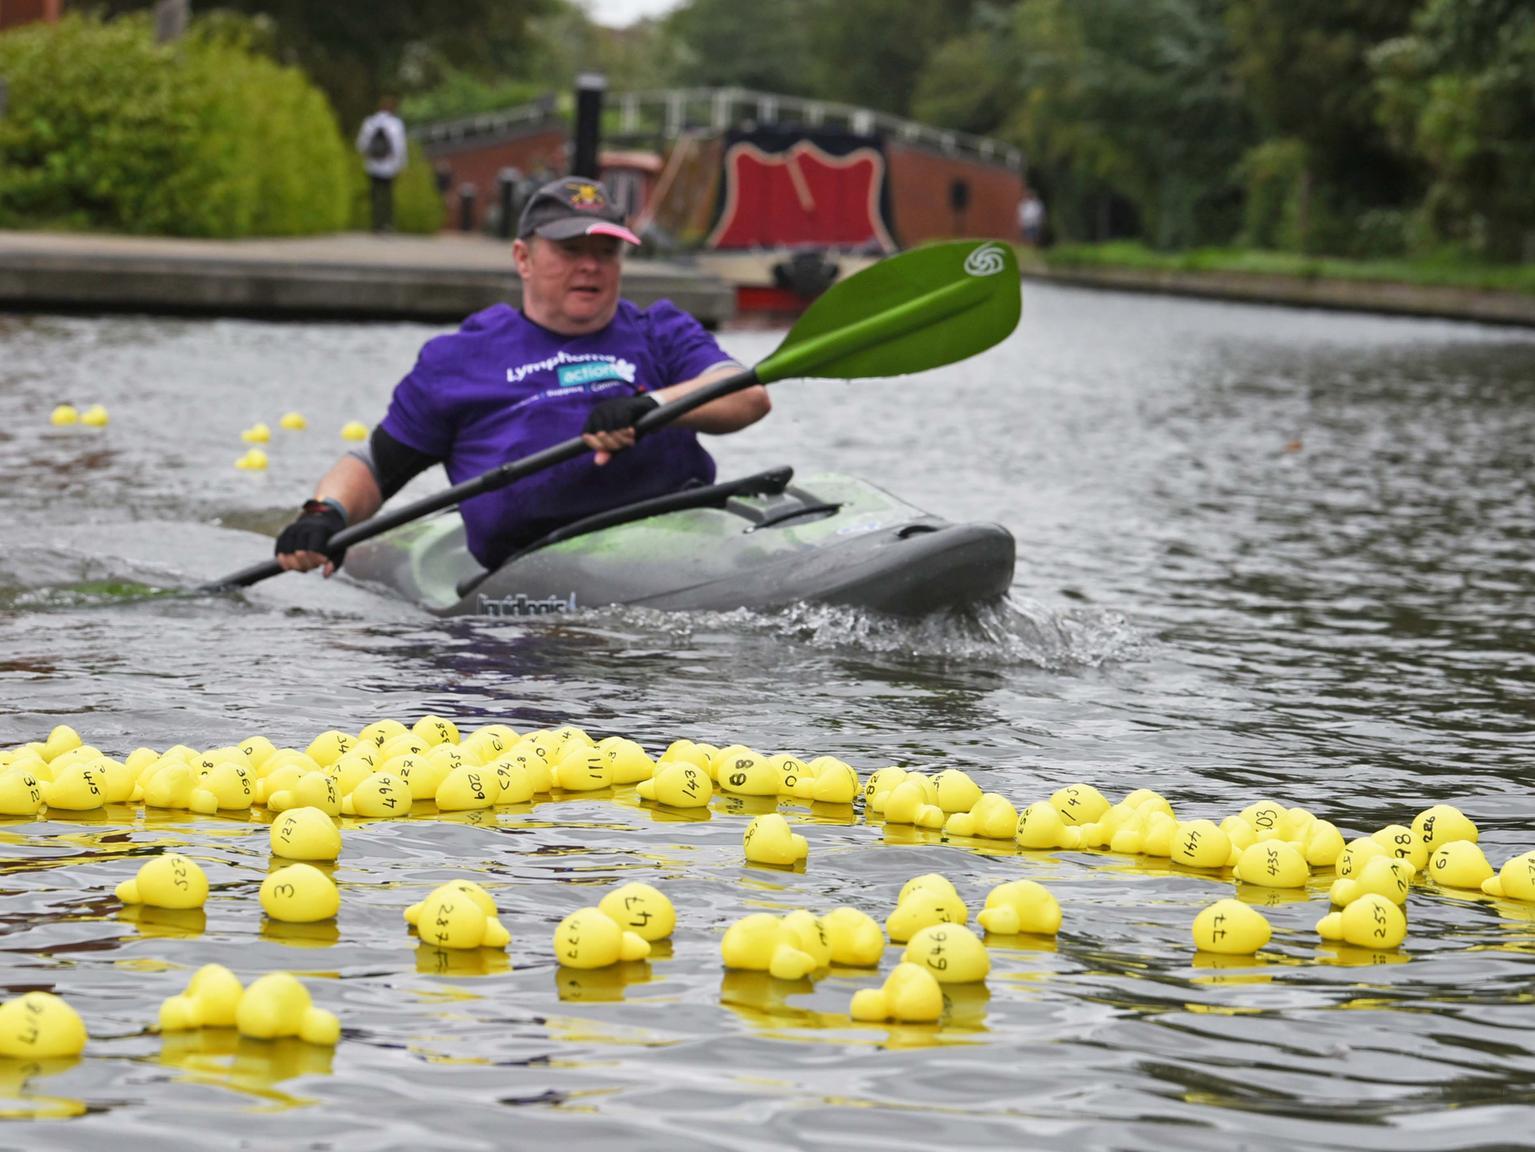 Aylesbury-based charity Lymphoma Action braved the wind in August to host a duck race on the canal basin